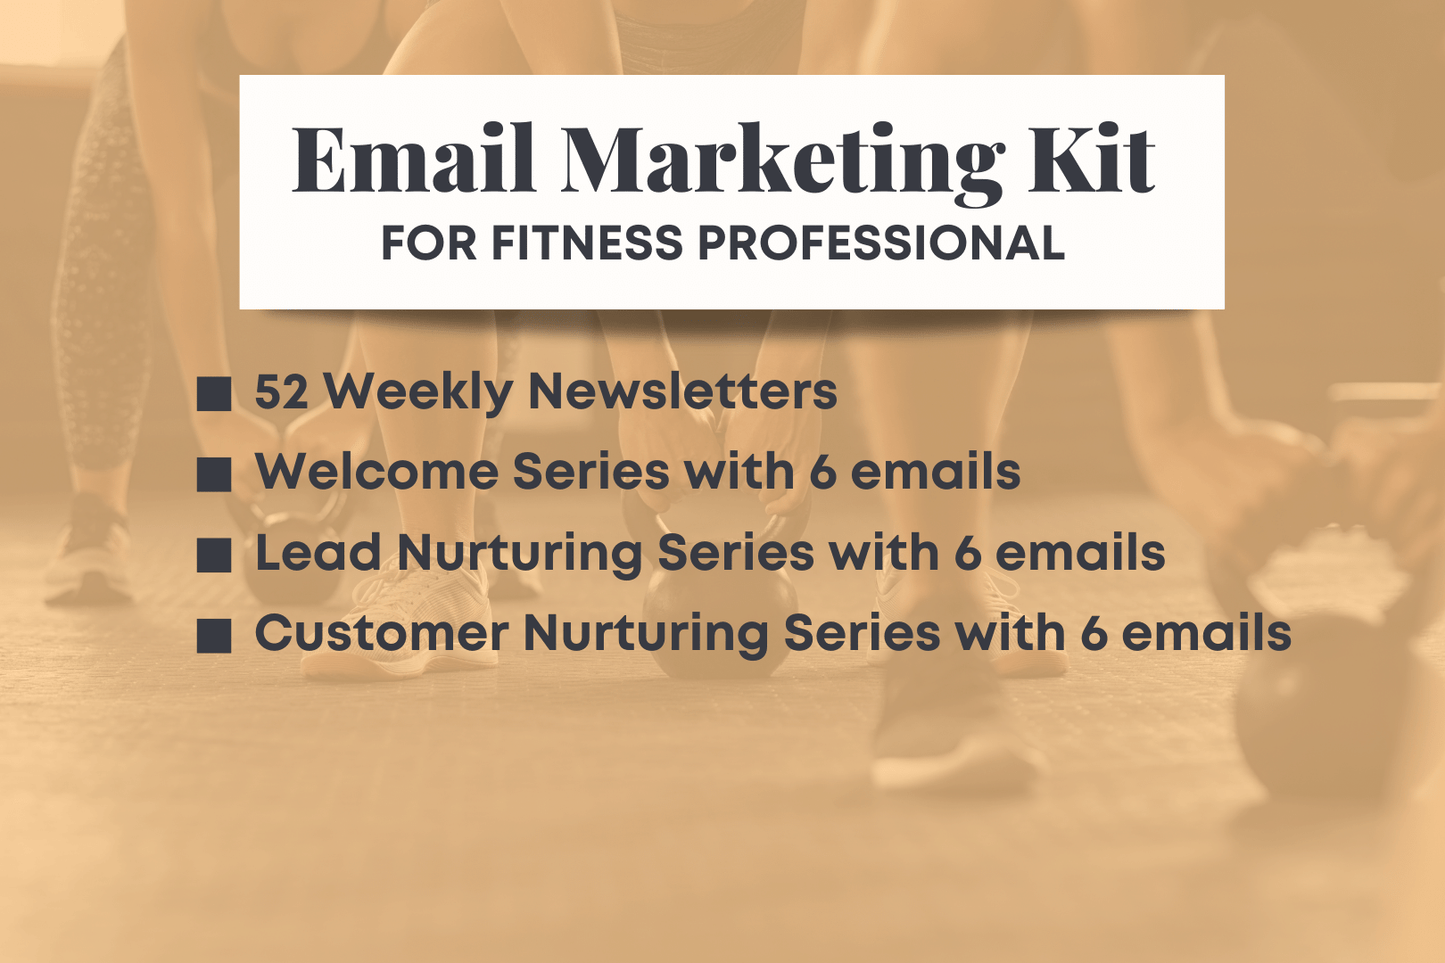 Email Marketing Kit For Fitness Professionals